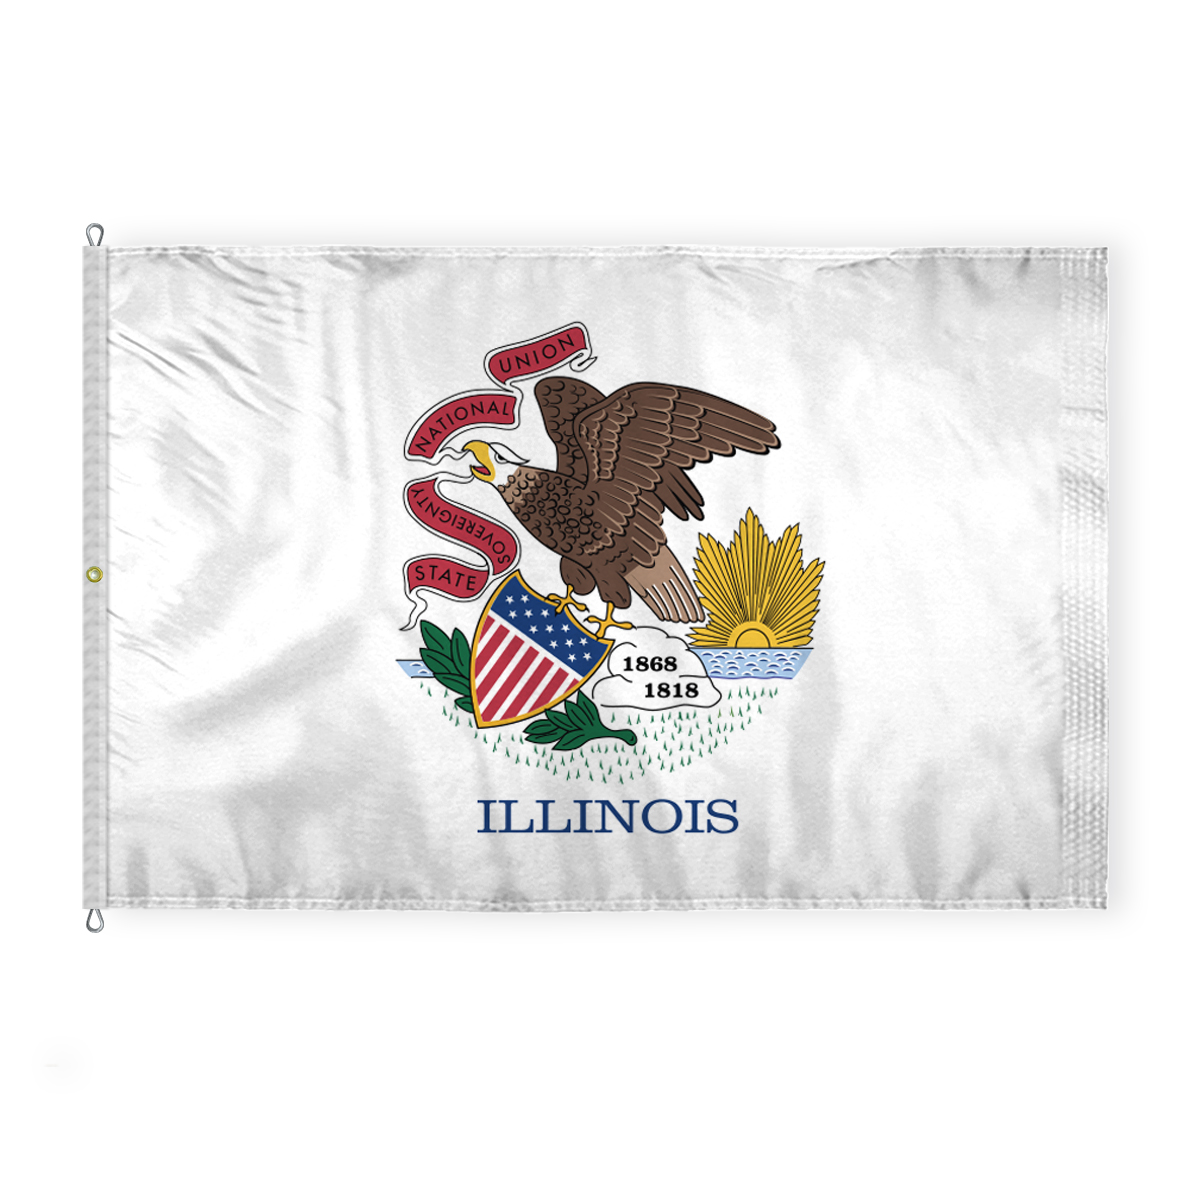 AGAS Illinois State Flag 8x12 Ft - Double Sided Reverse Print On Back 200D Nylon